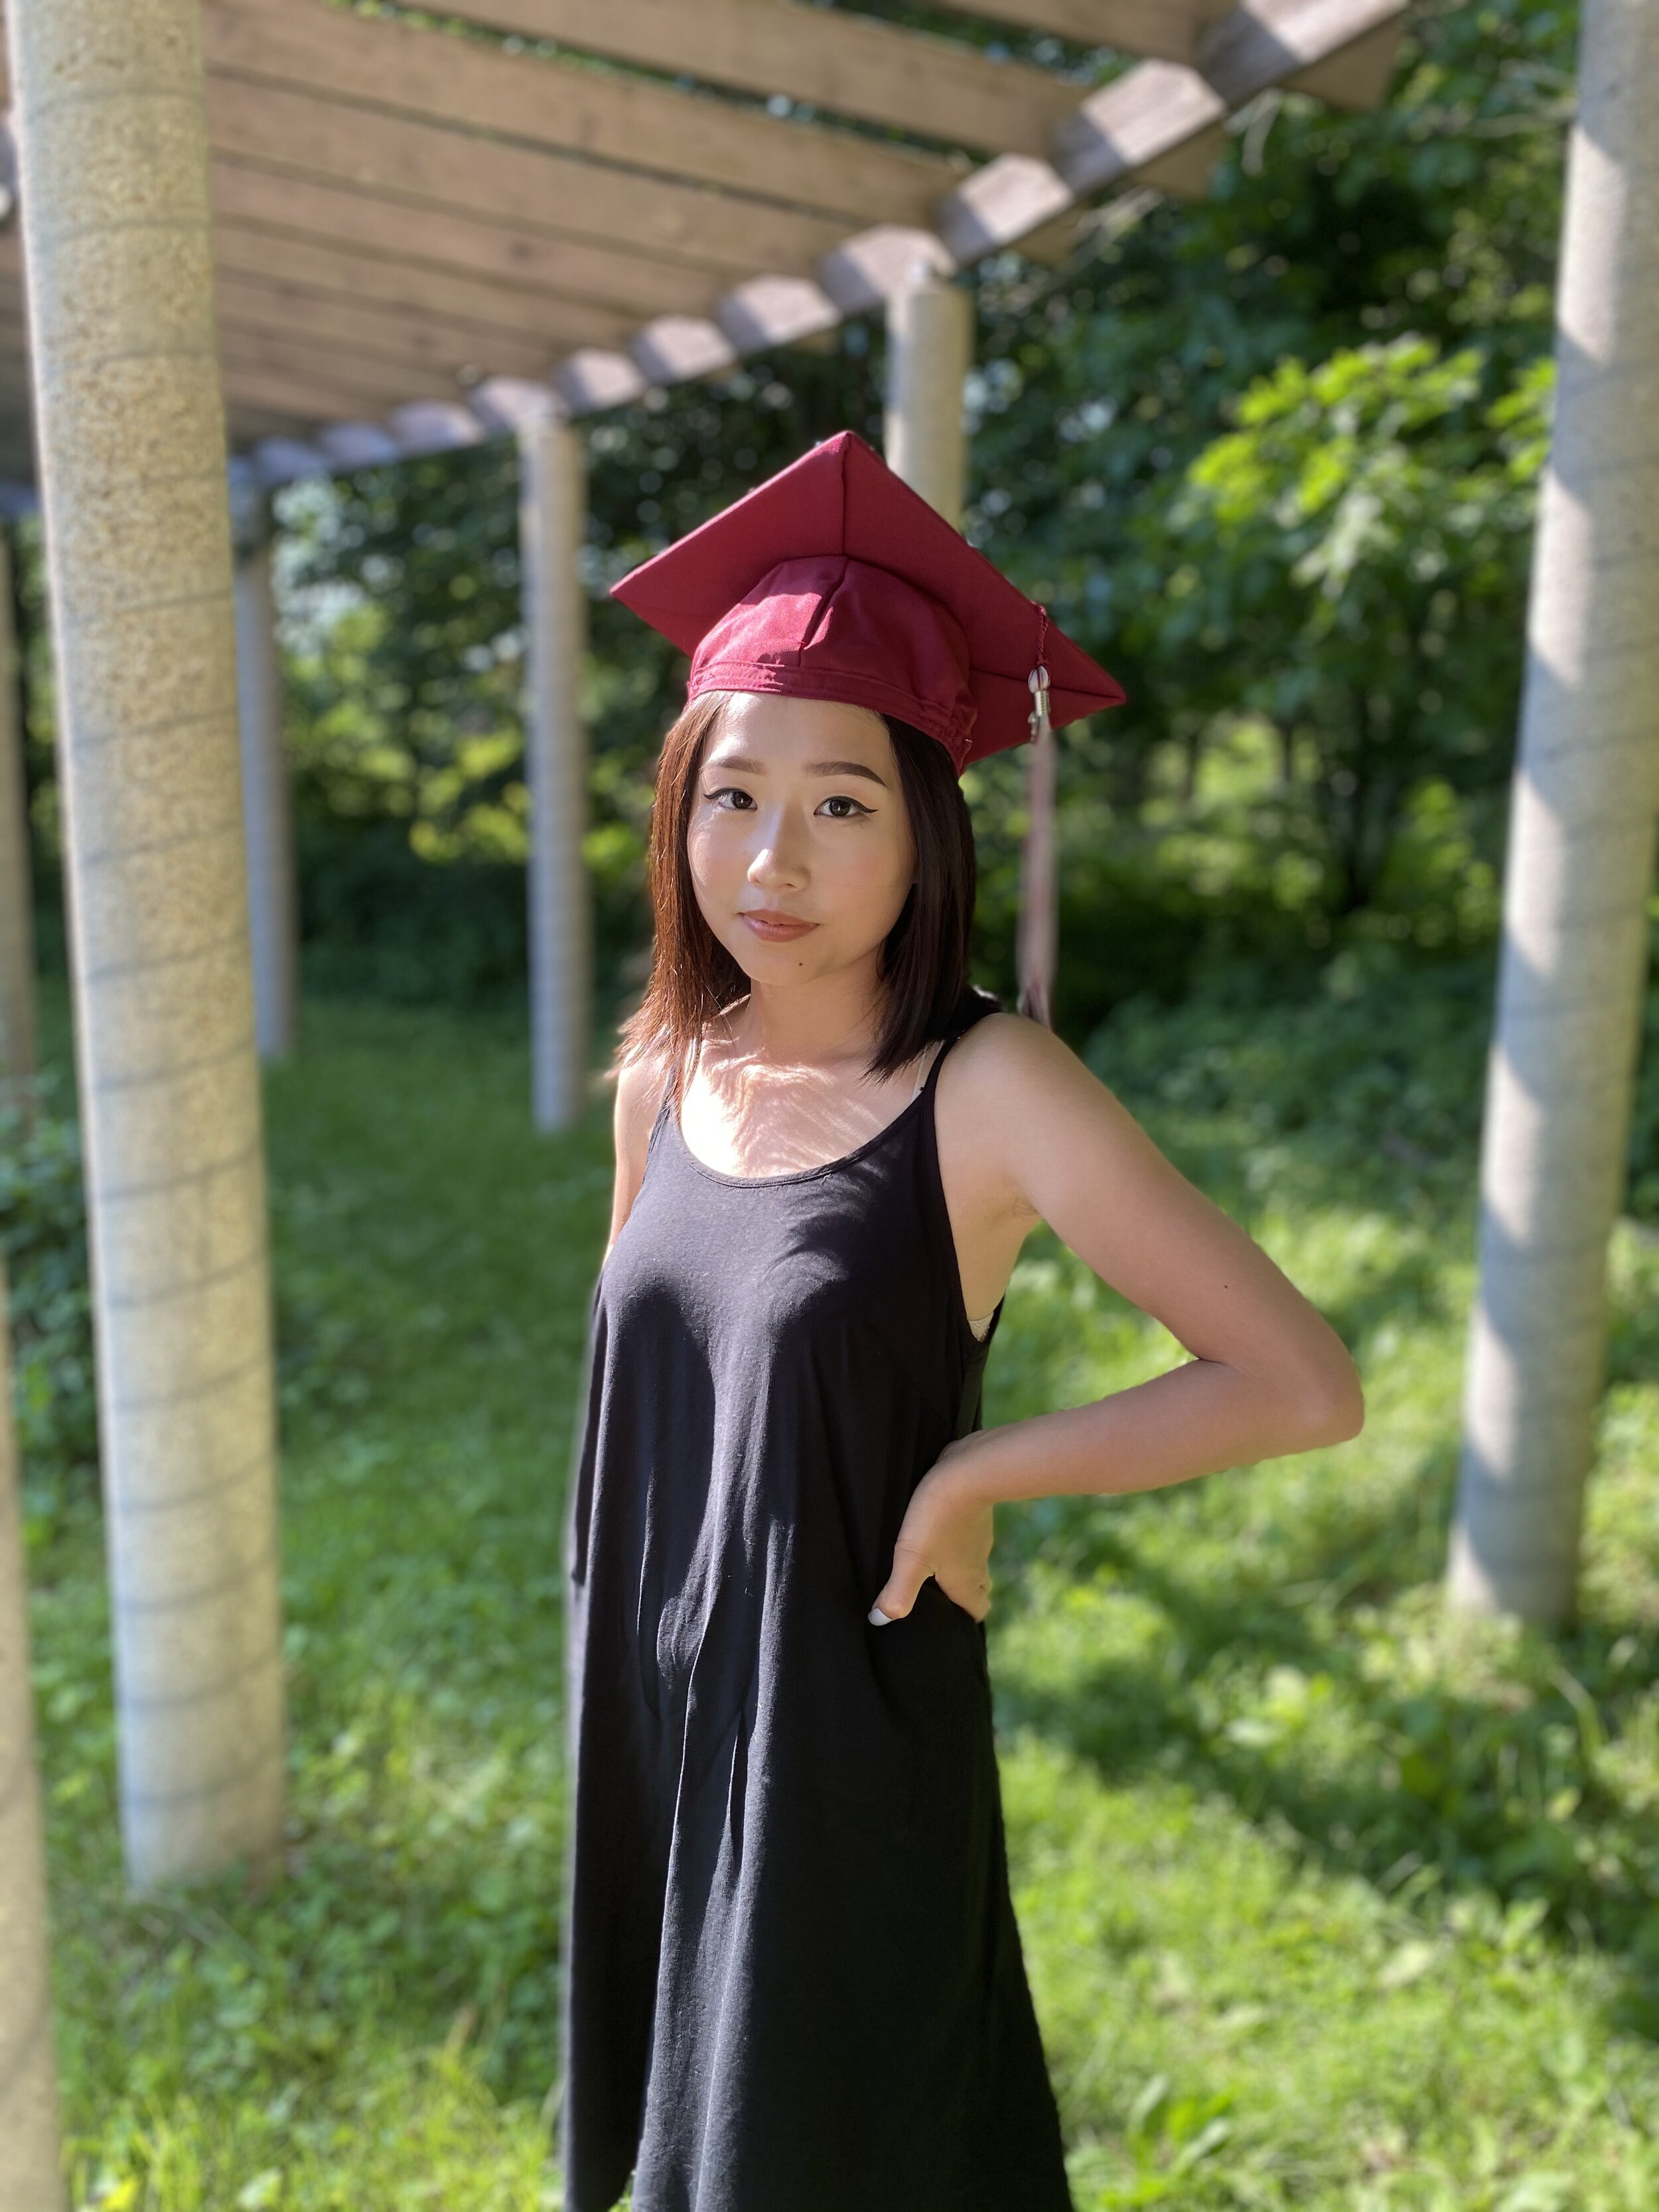  Nautiya Chu - Madison La Follette High School   What are your future dreams and goals?  For a profession, I hope to be a nurse. As of right now I want to get a BA in nursing and get a job as a Registered Nurse and then specialize to nurse in specifi